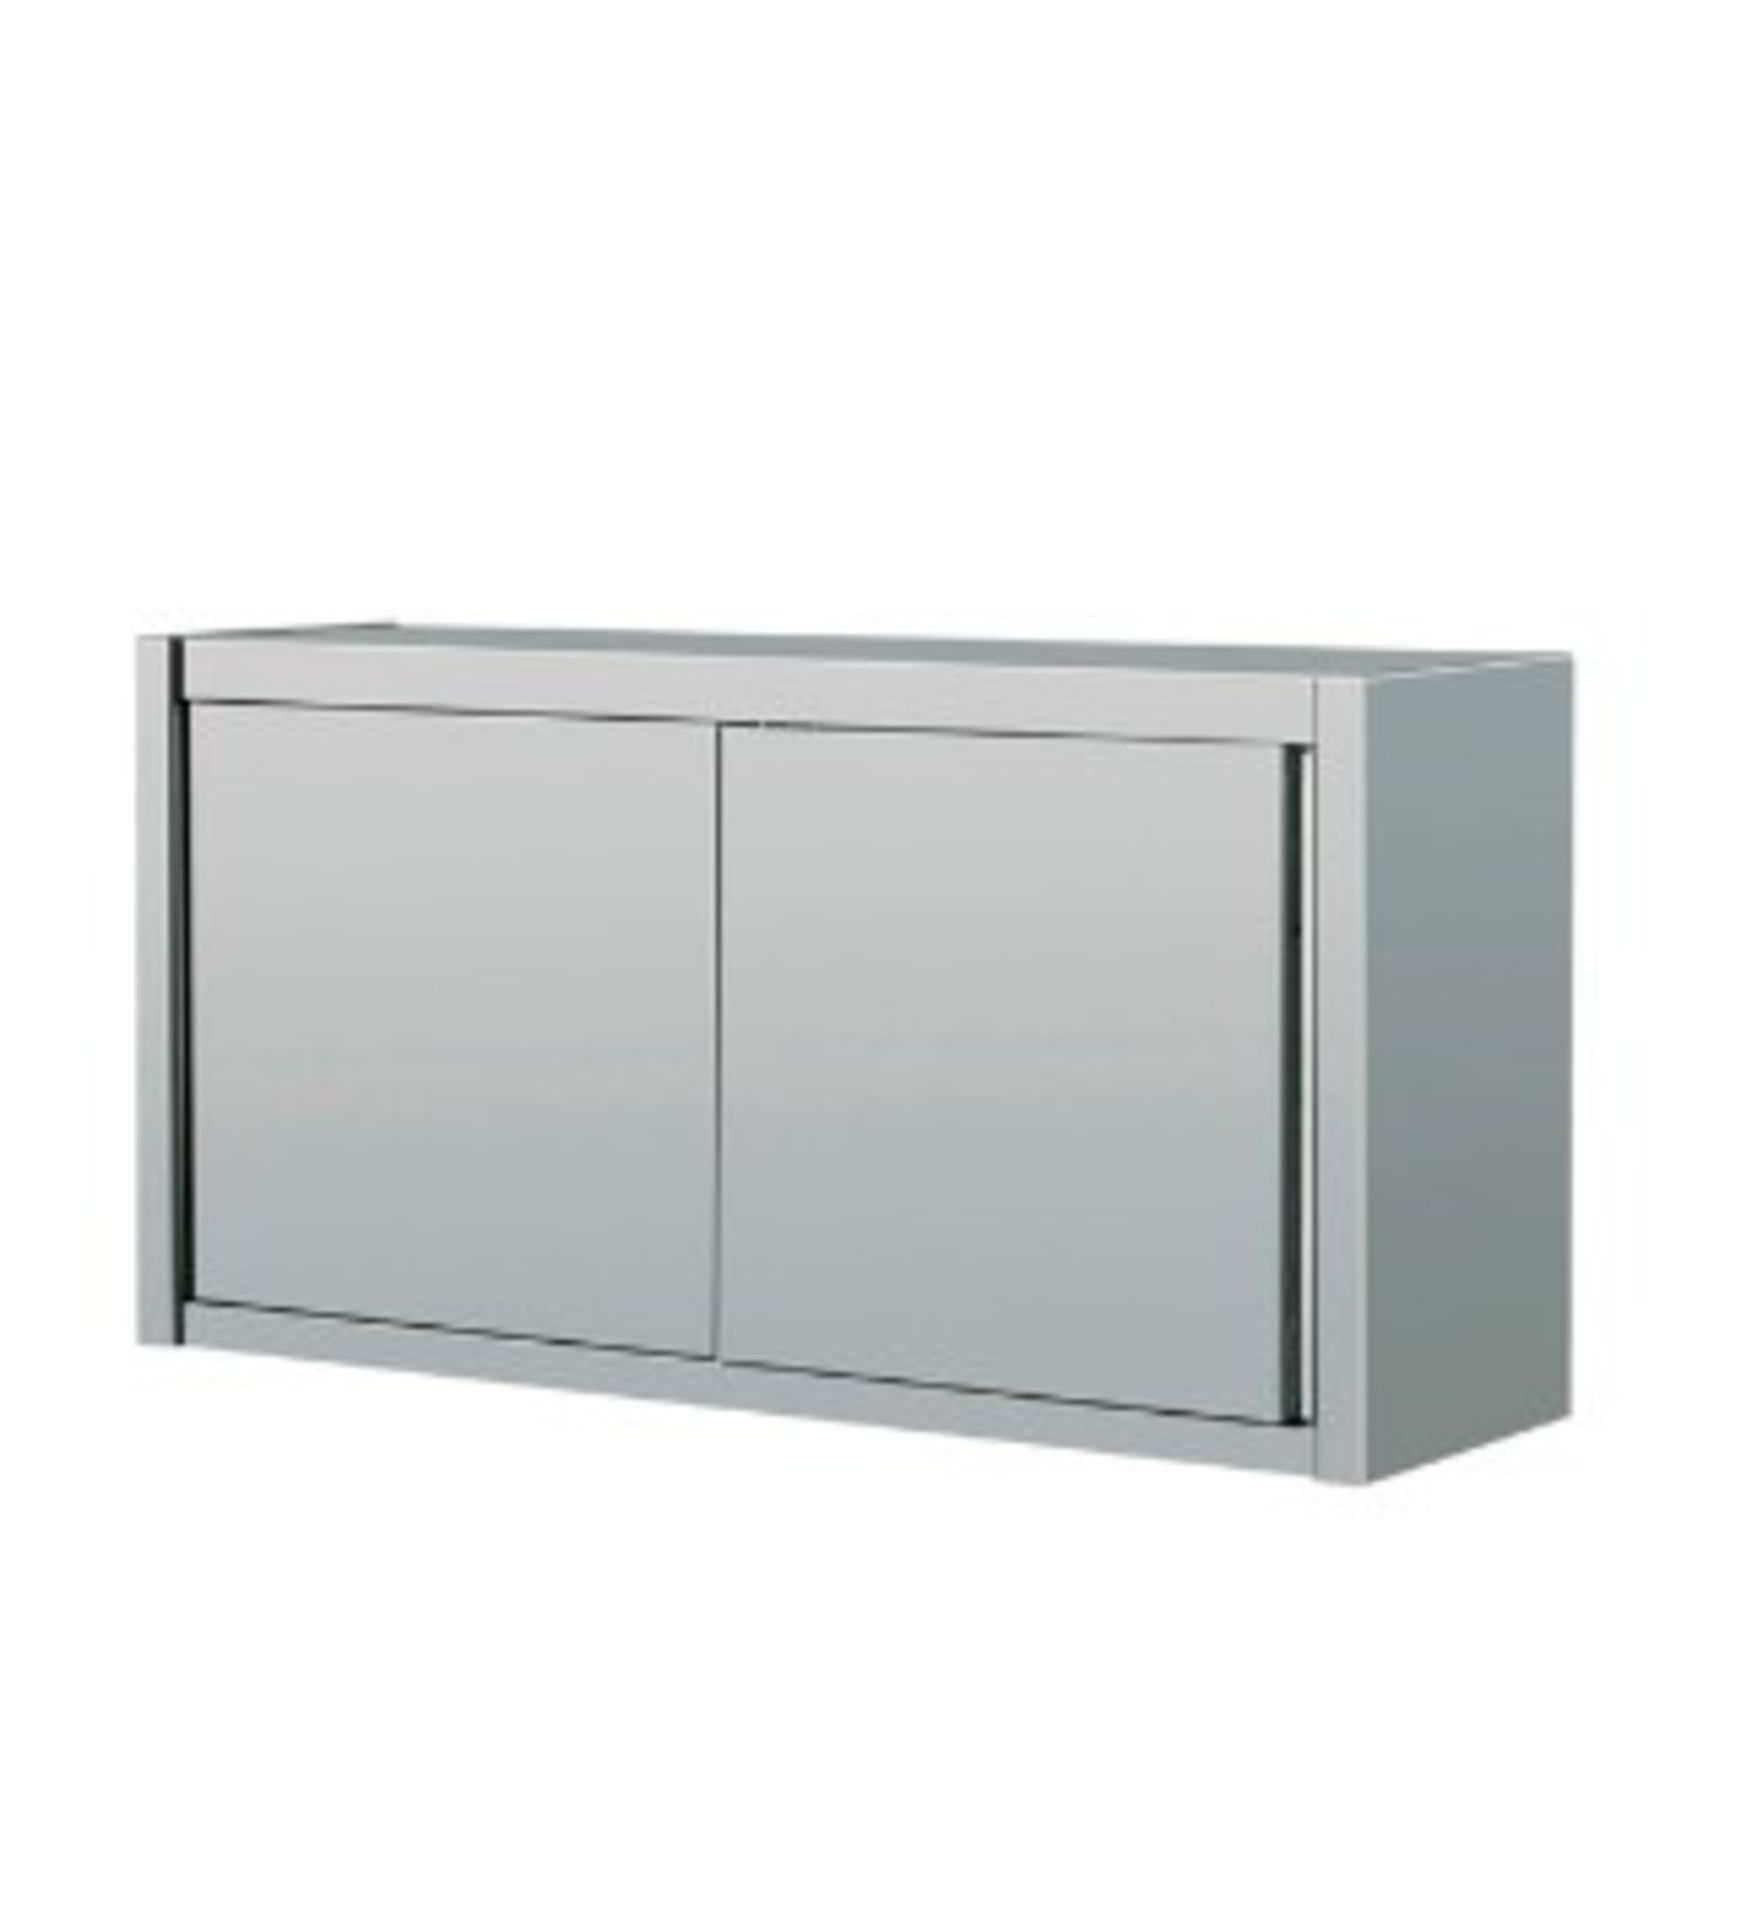 wall cupboard with sliding door size:1600x400x650mm Model#:THWOR164 L*W*H (inch):62*16*26 Weight (